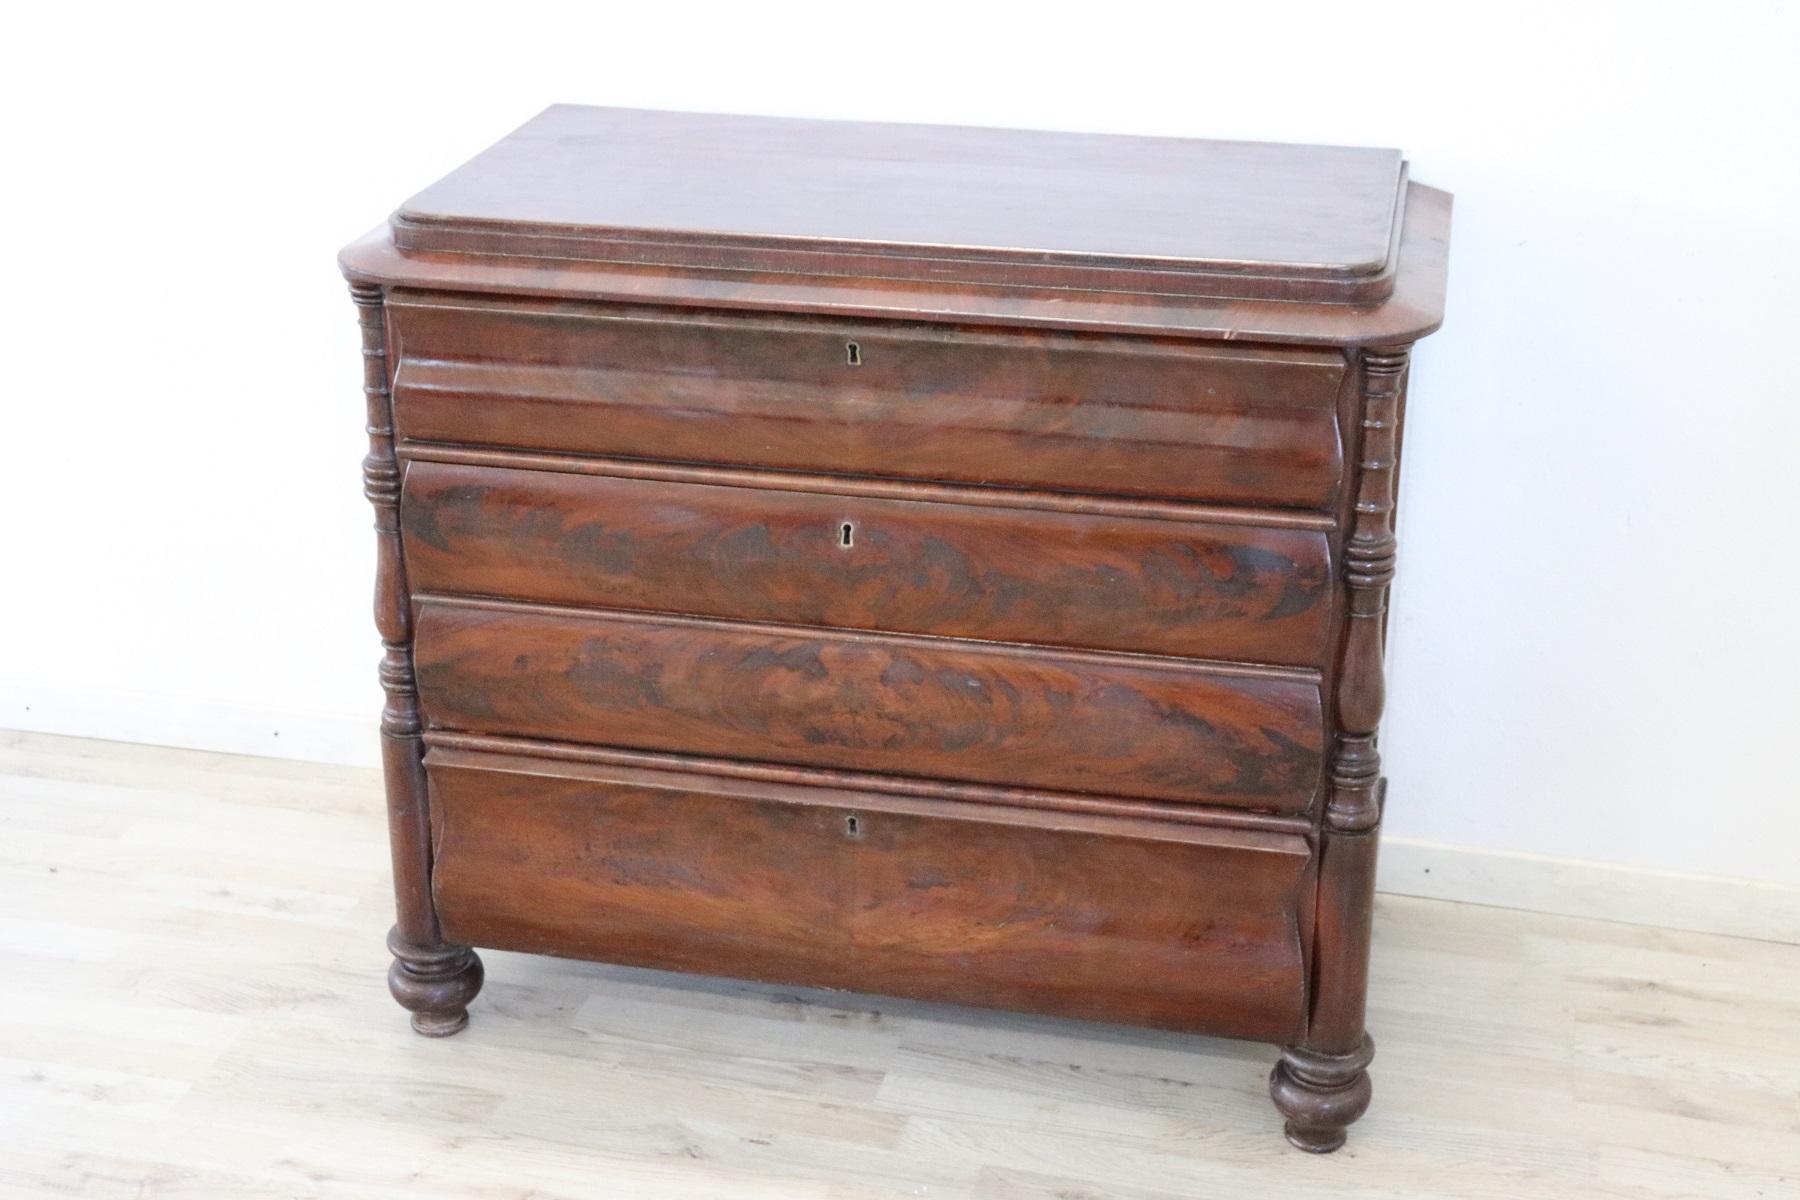 Antique English chest of drawers 1850s in mahogany wood. Very linear and essential with four comfortable drawers. On the front drawers with a particular rounded shape. At the sides on the front elegant turned decoration. It shows signs of wear at